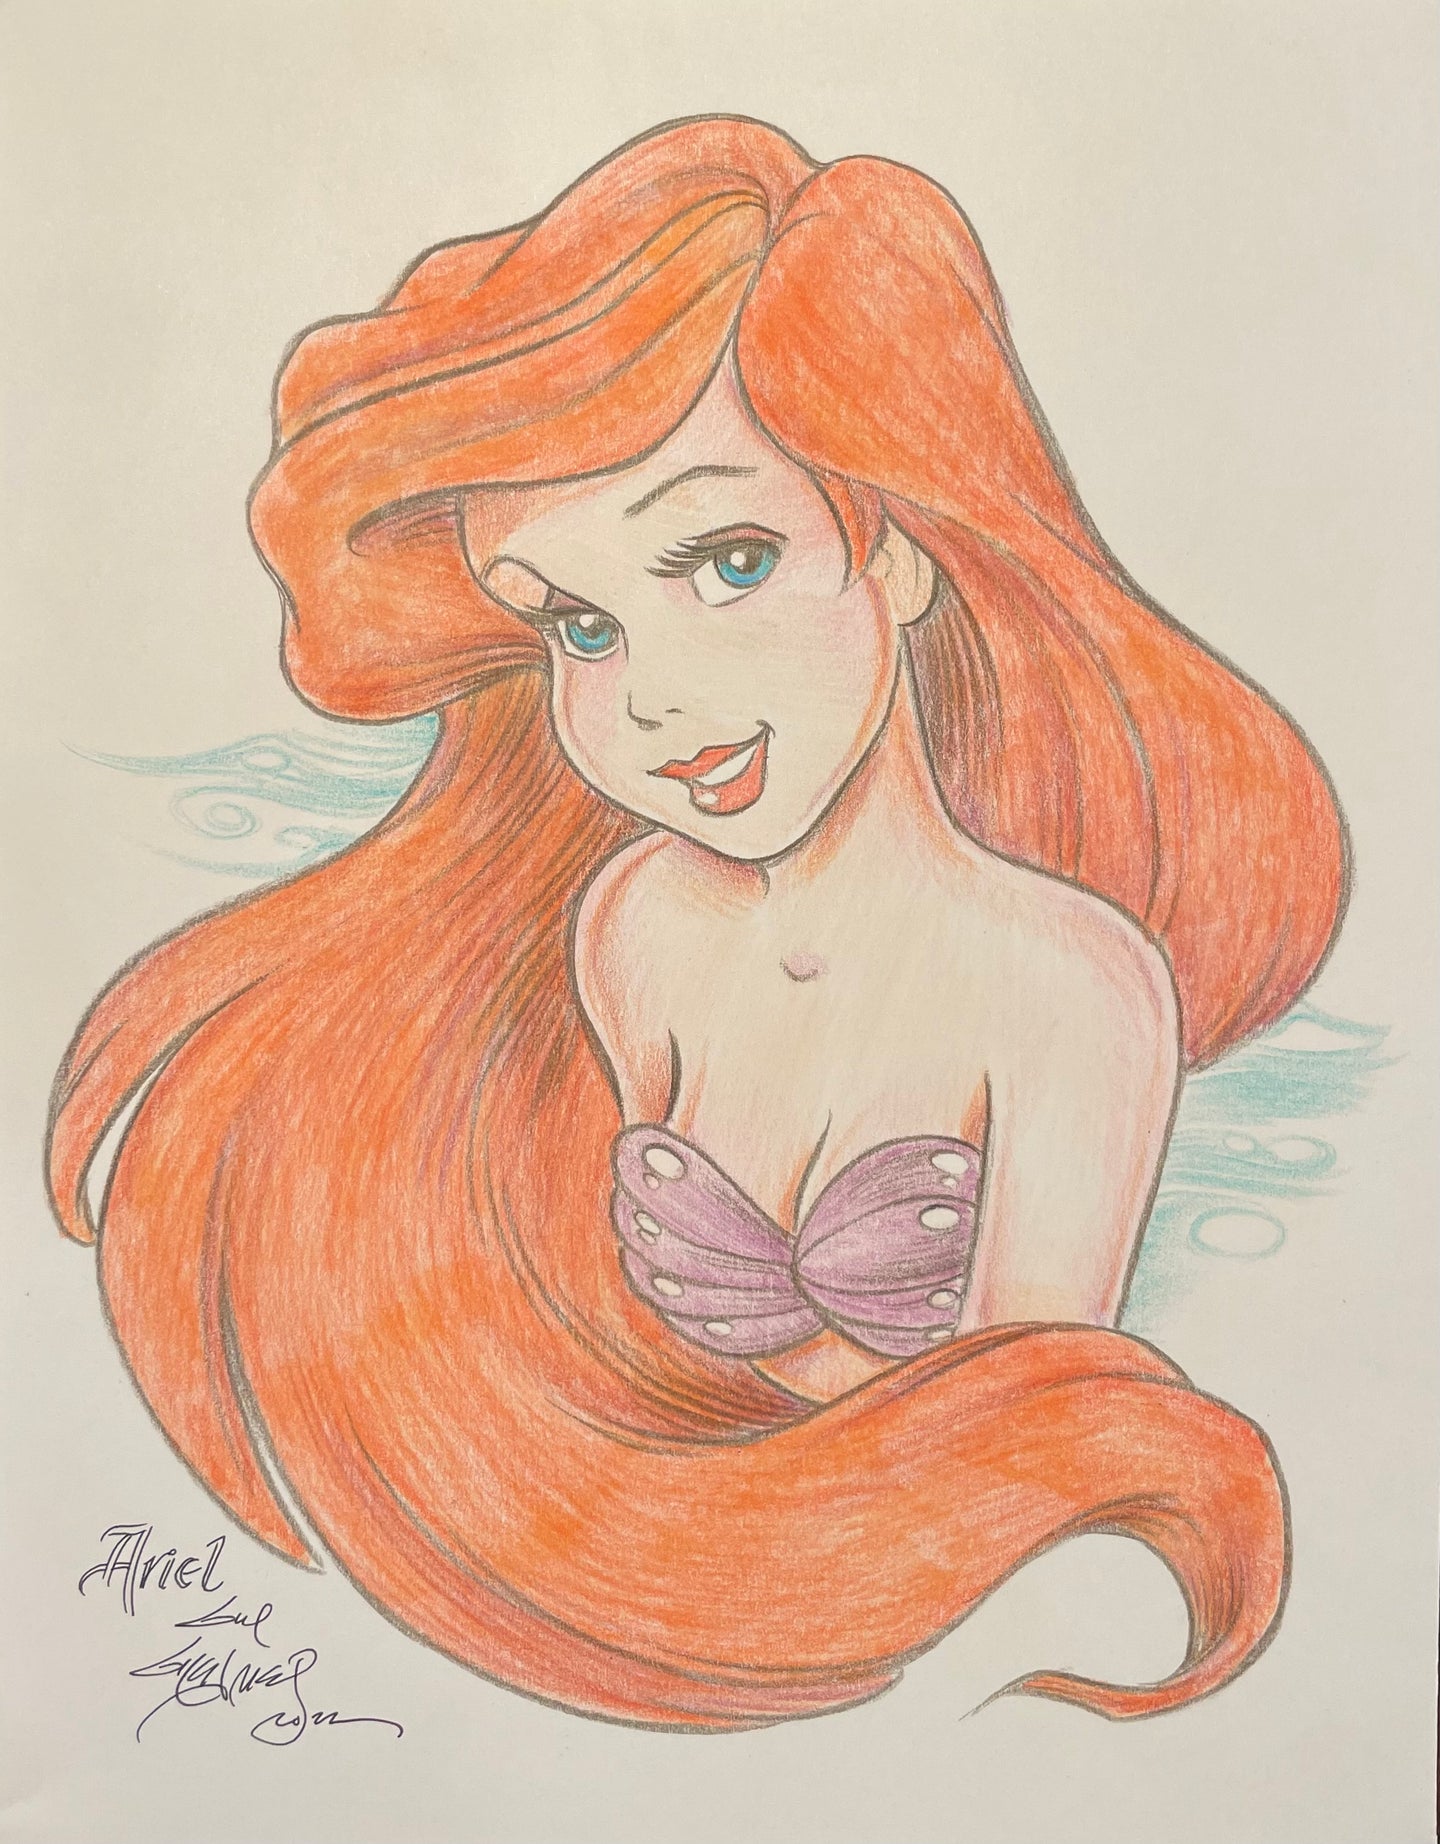 Ariel the Little Mermaid 11x14 Art Print - Created by Guy Gilchrist